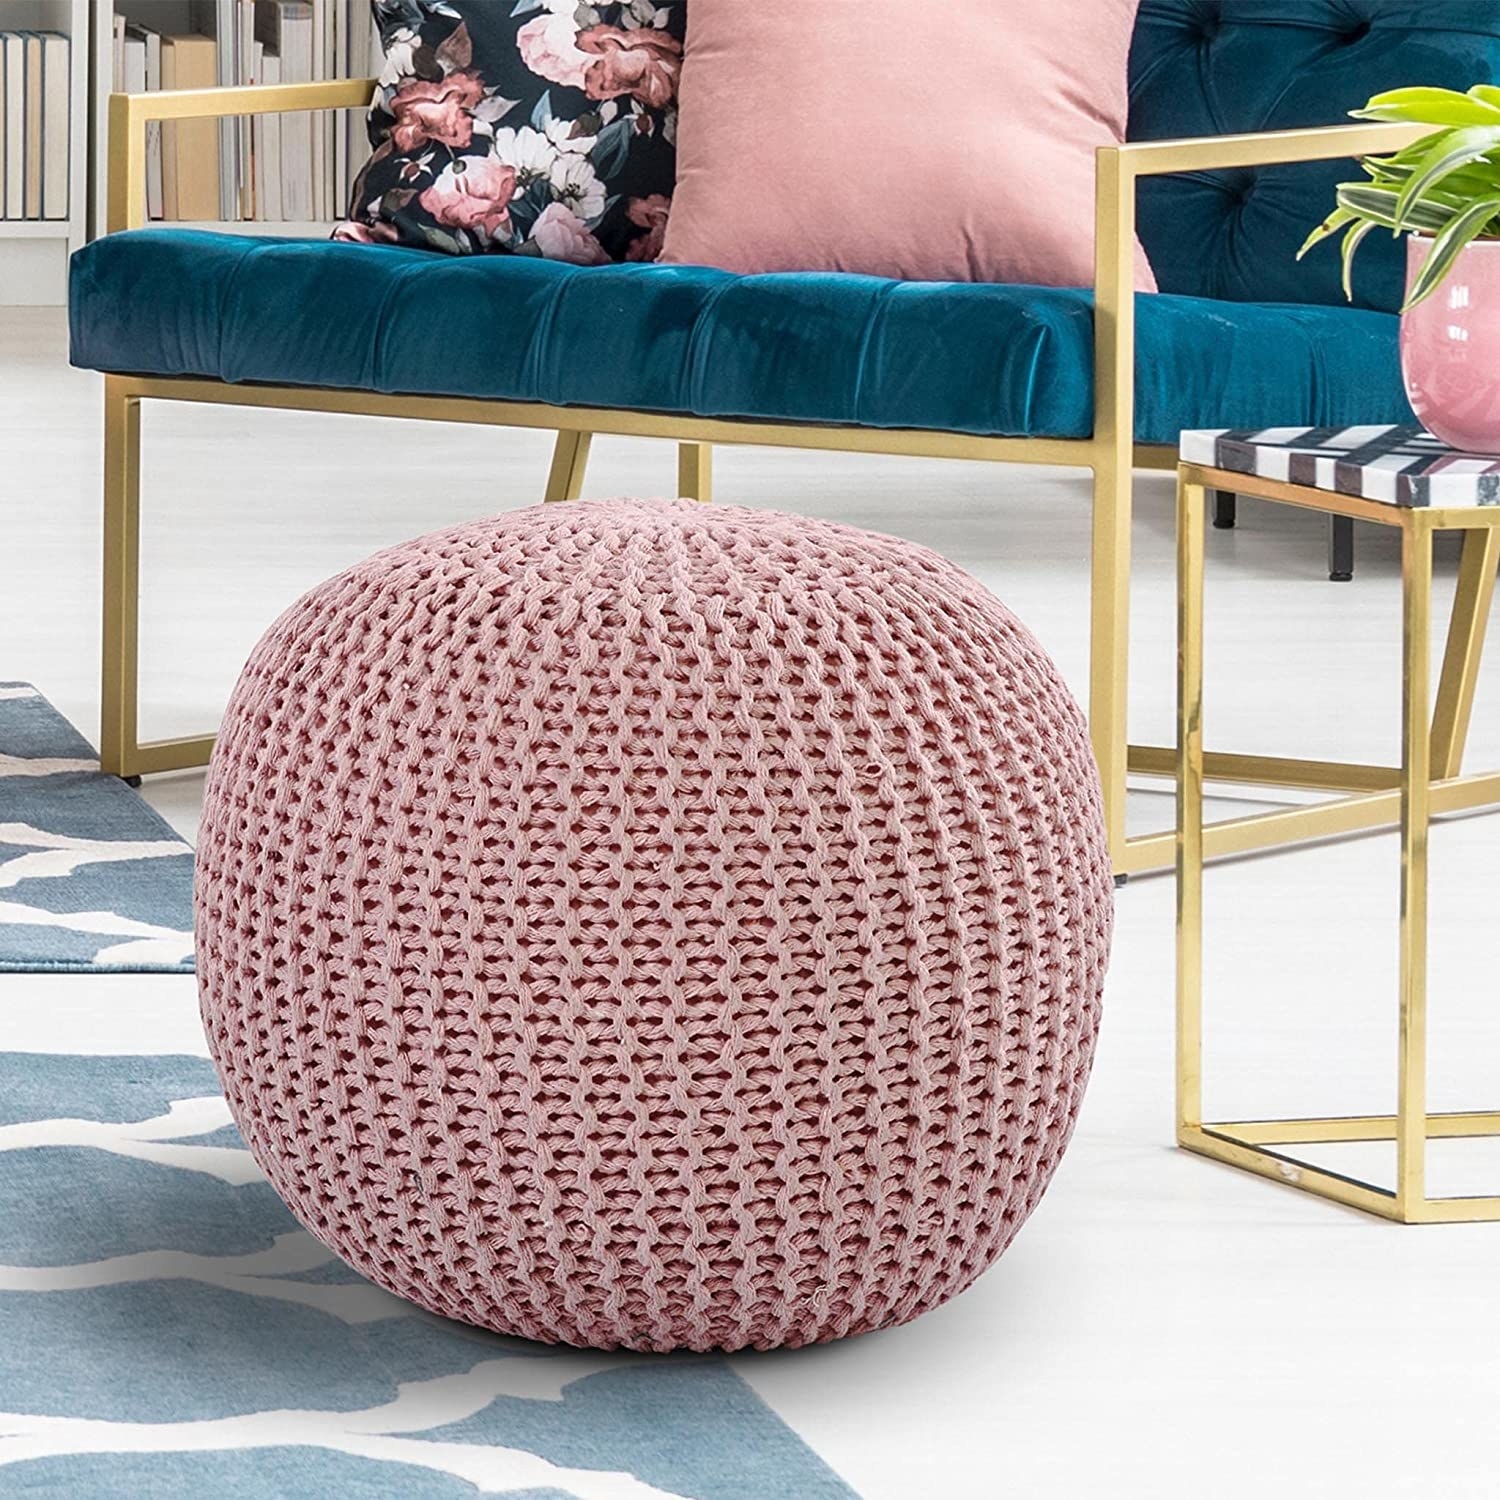 A knitted round pouffe in a baby pink shade